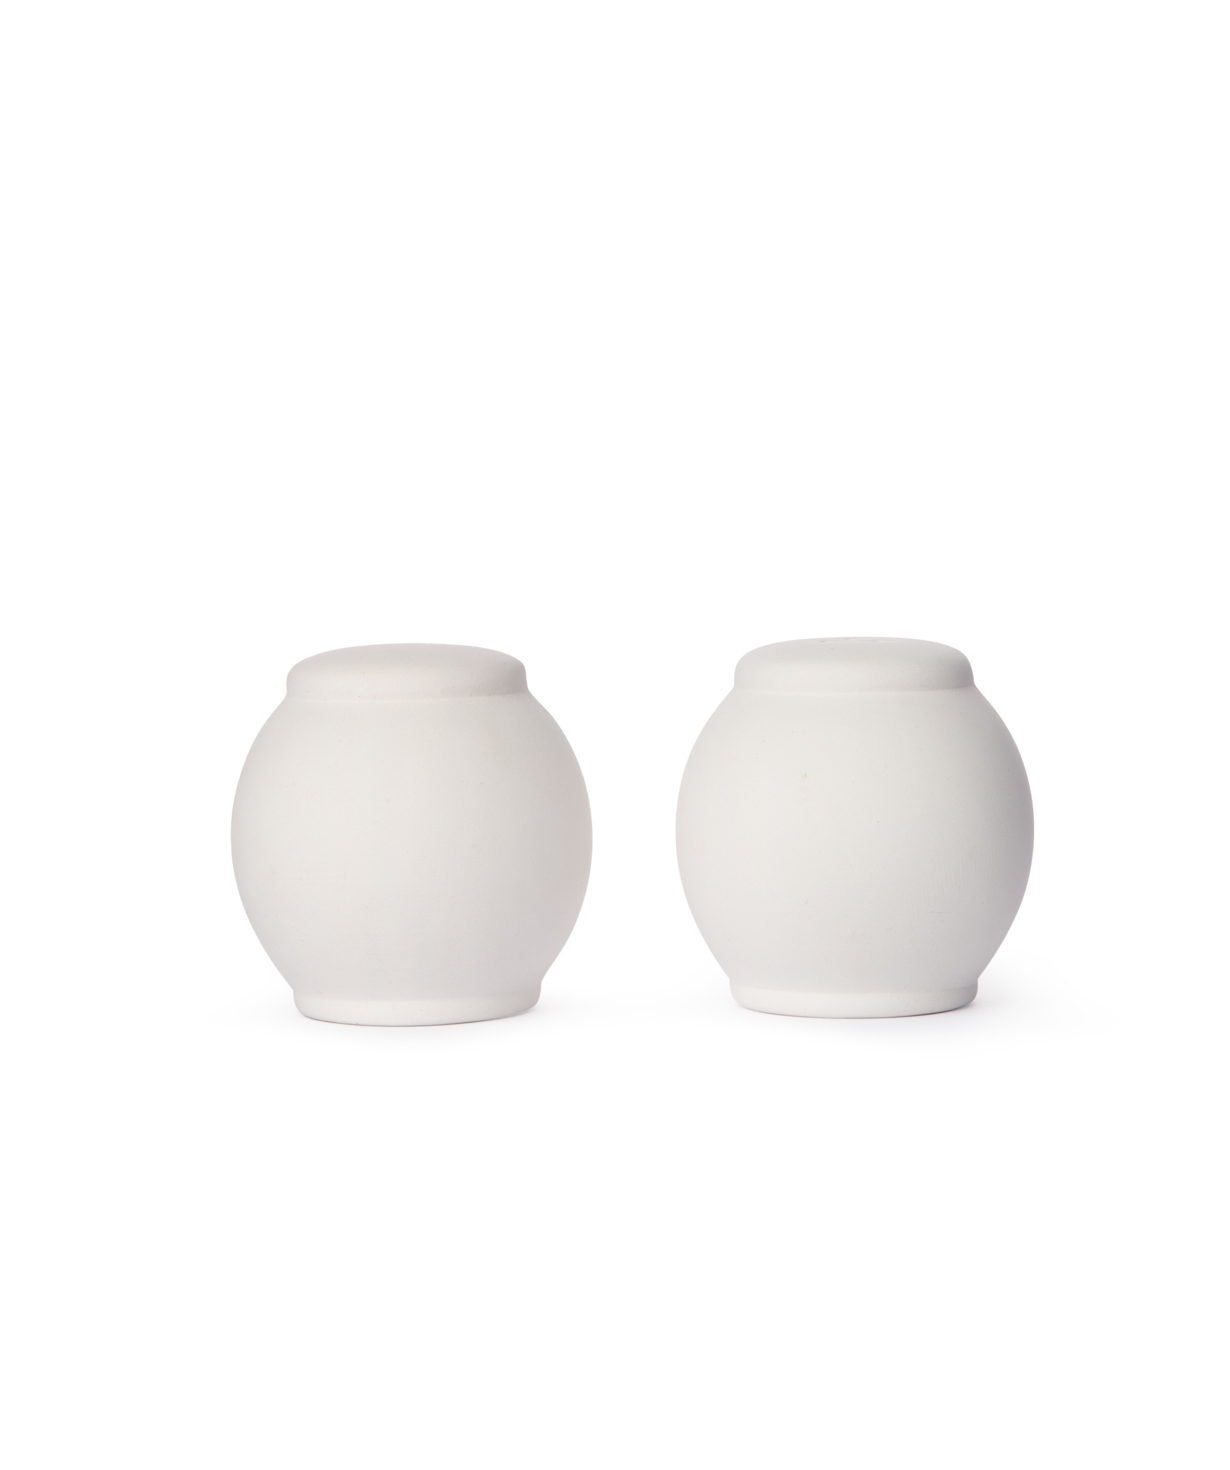 Collection `Yes Republic` art, salt shakers